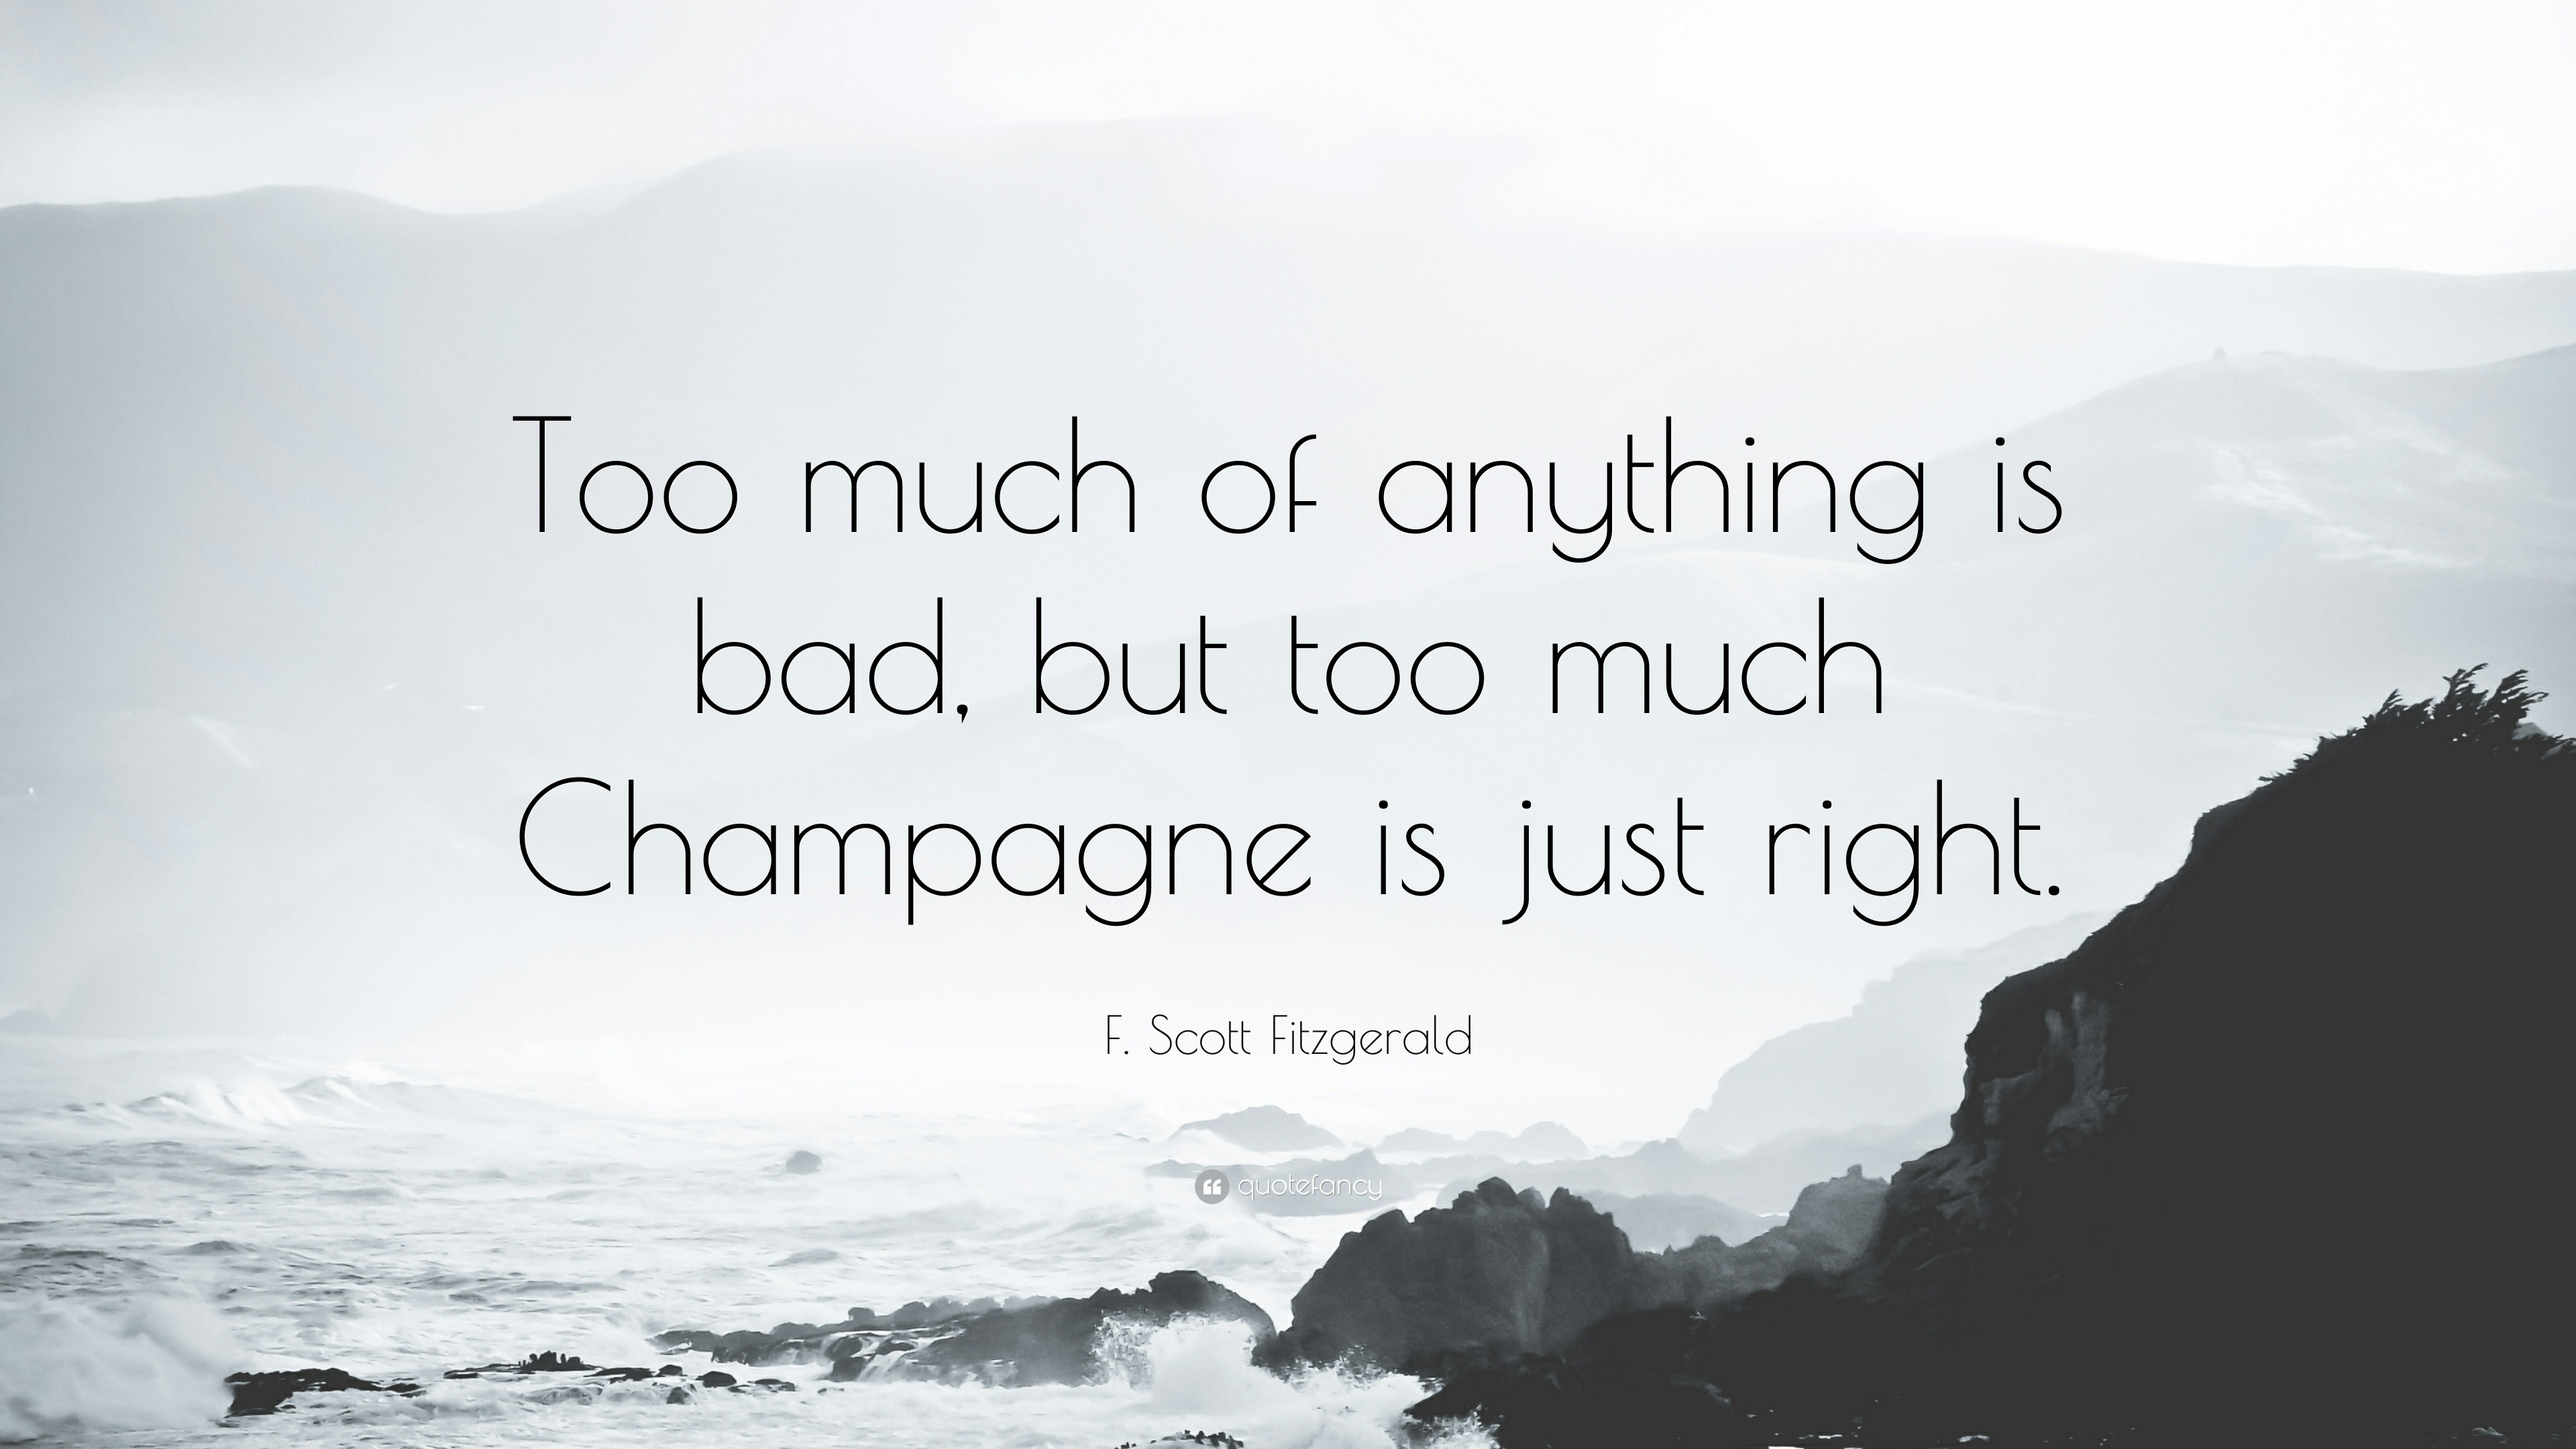 F. Scott Fitzgerald Quote: “Too much of anything is bad, but too much Champagne is just